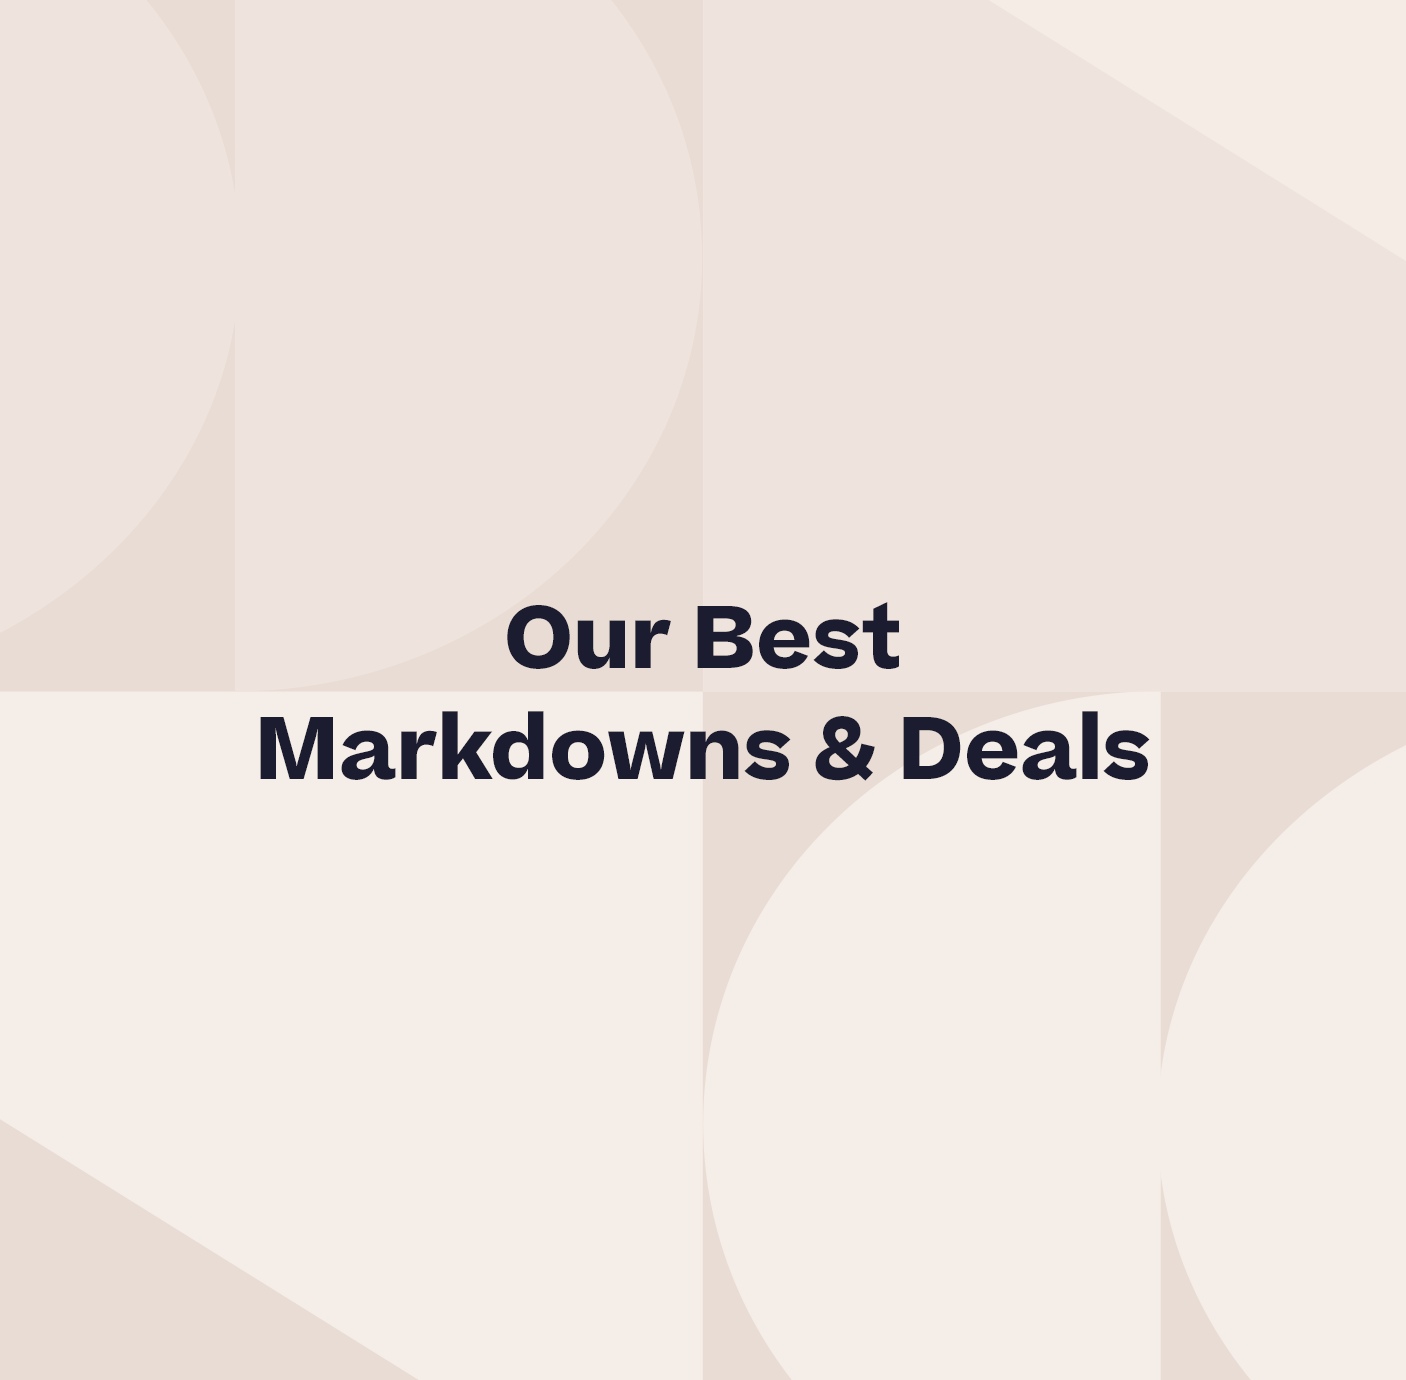 Sale All our best markdowns